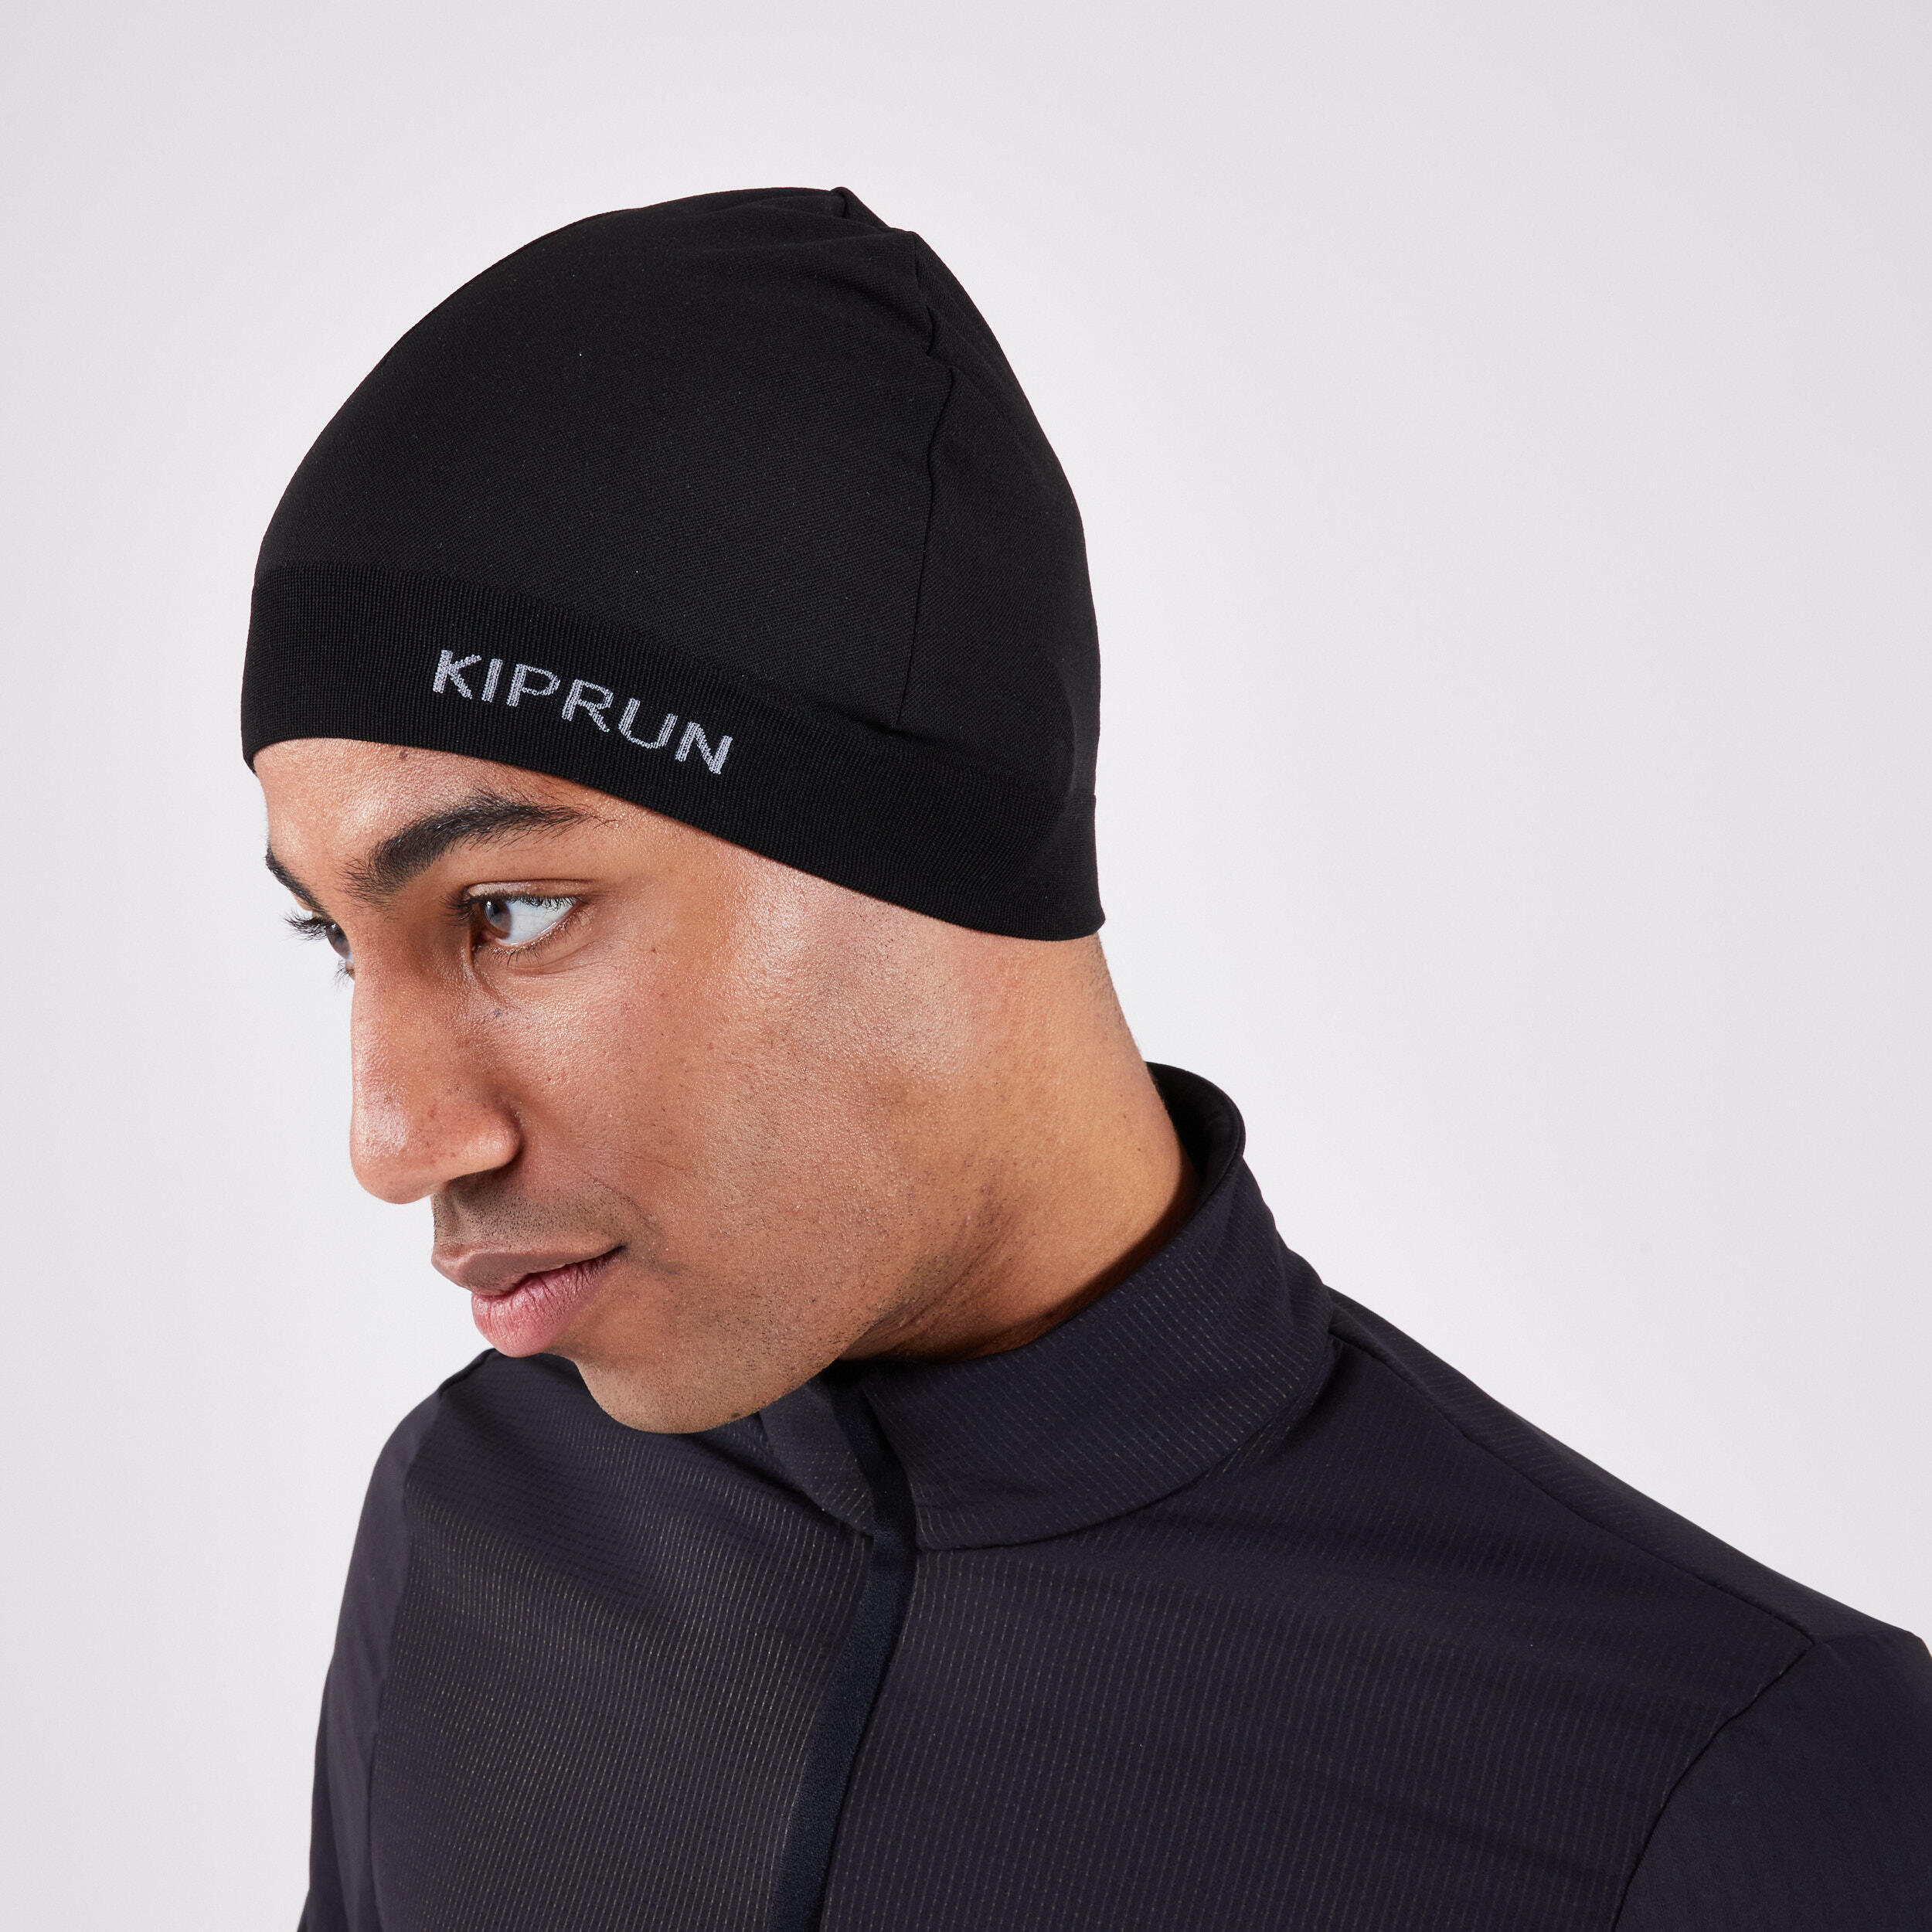 Shop Generic Sweat Wicking Hat For Skiing Running Fitness Online